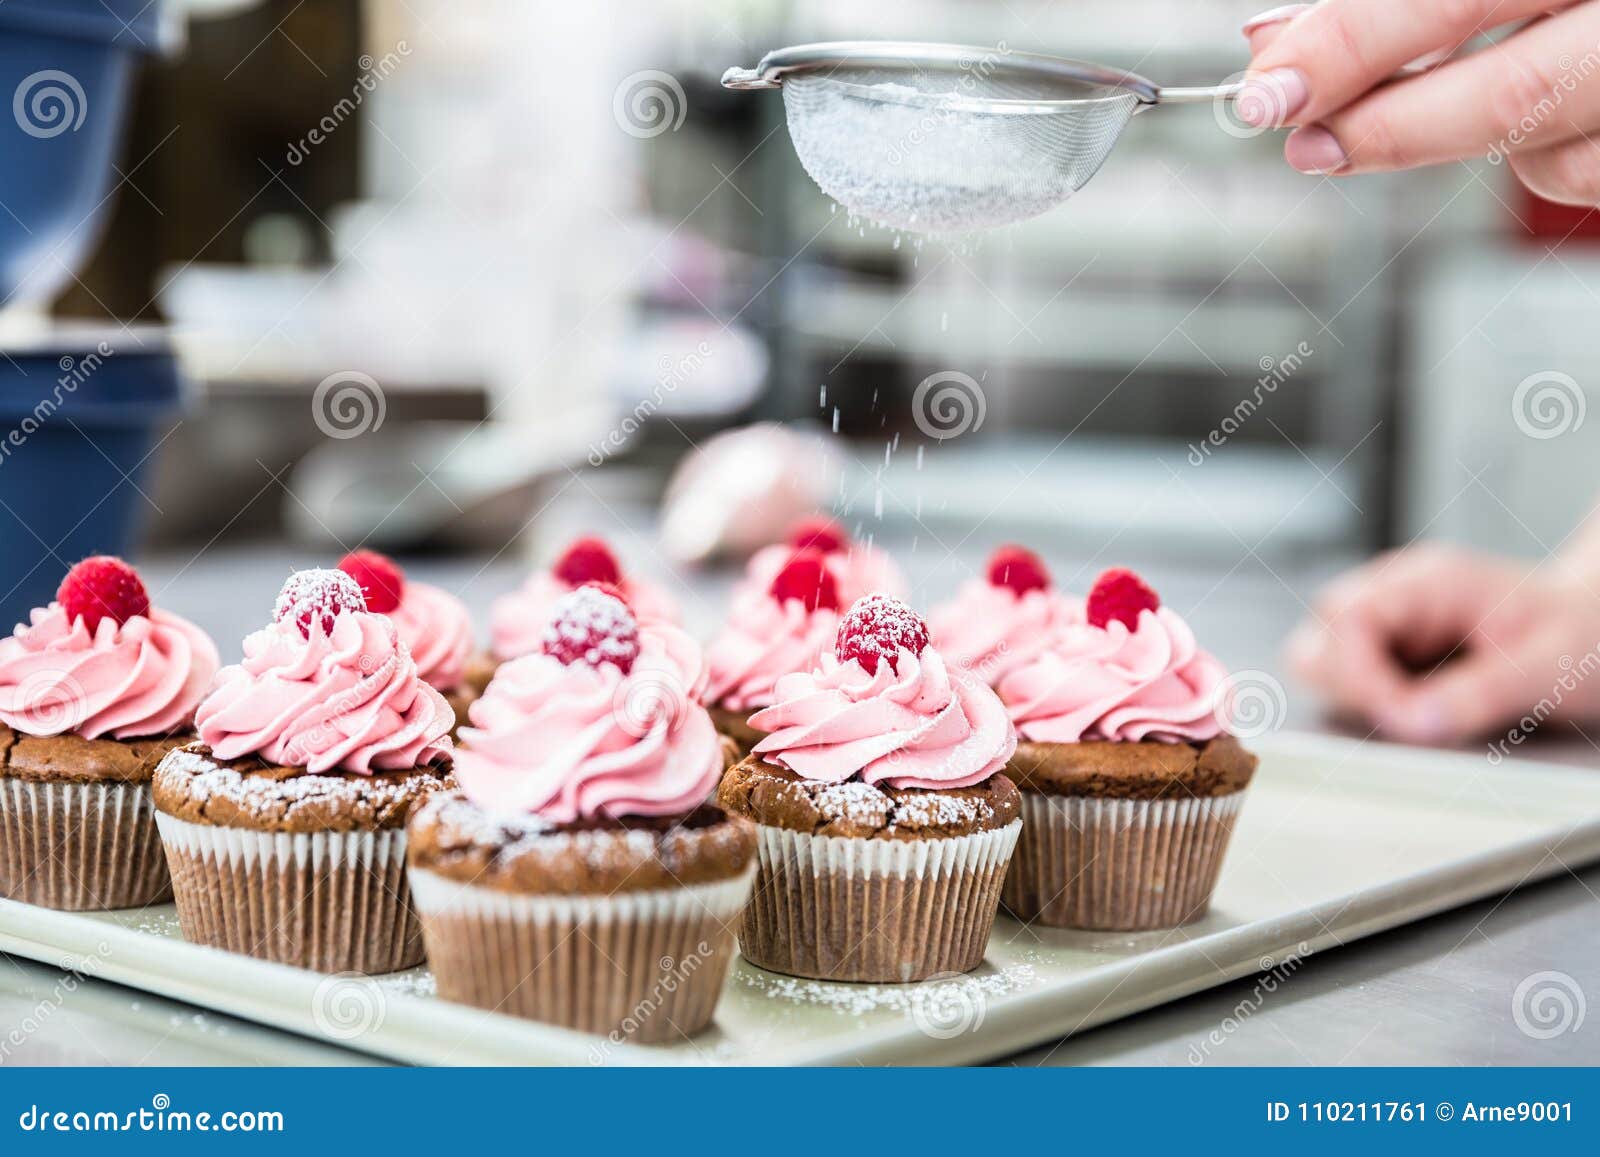 woman in confectionary icing cupcakes with sugar